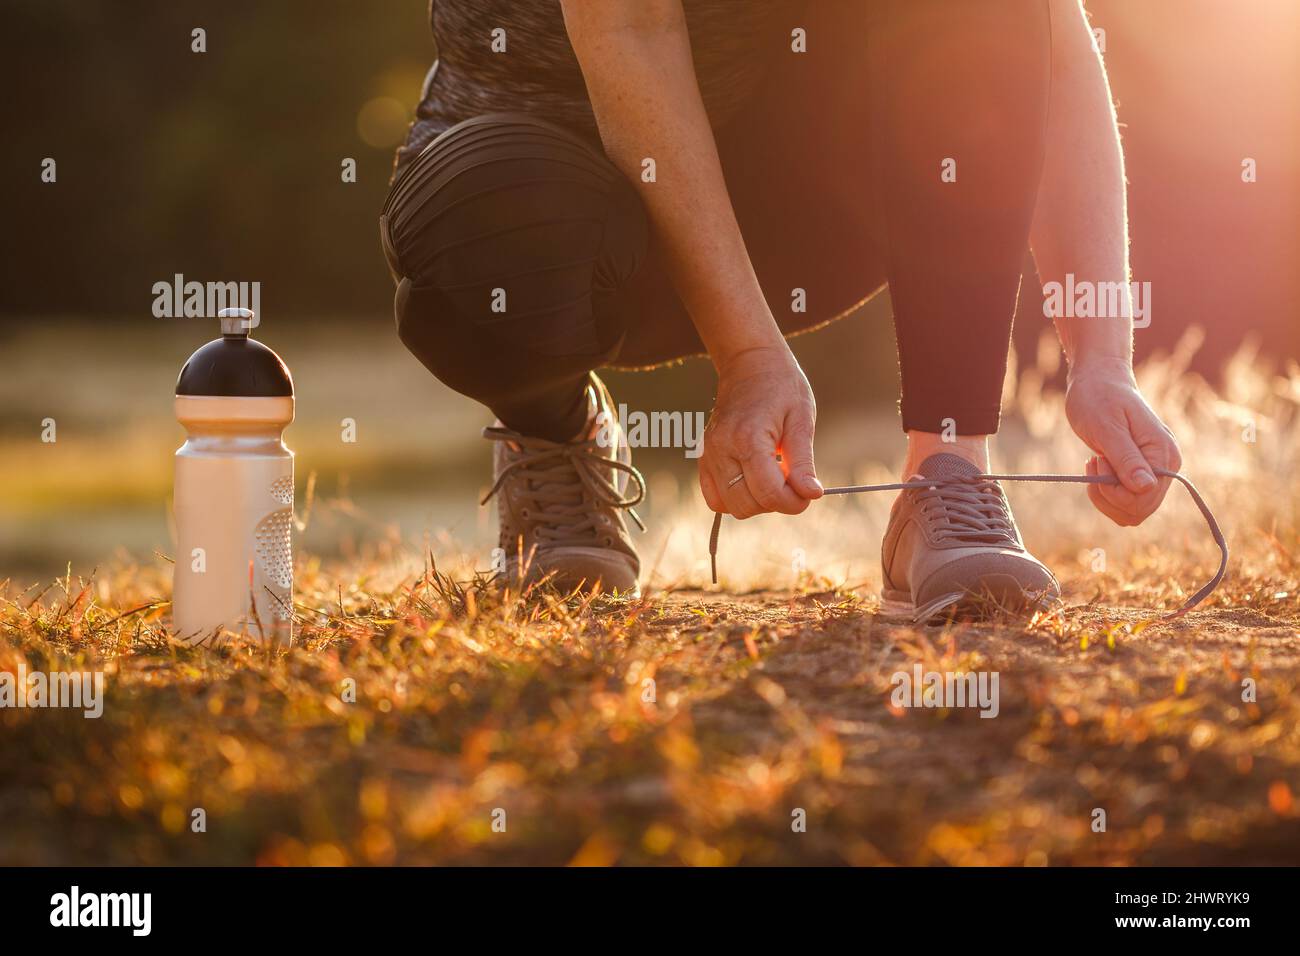 Woman tying shoelace of running shoe. Getting ready for jogging outdoors during sunset. Fitness, running and active lifestyle Stock Photo